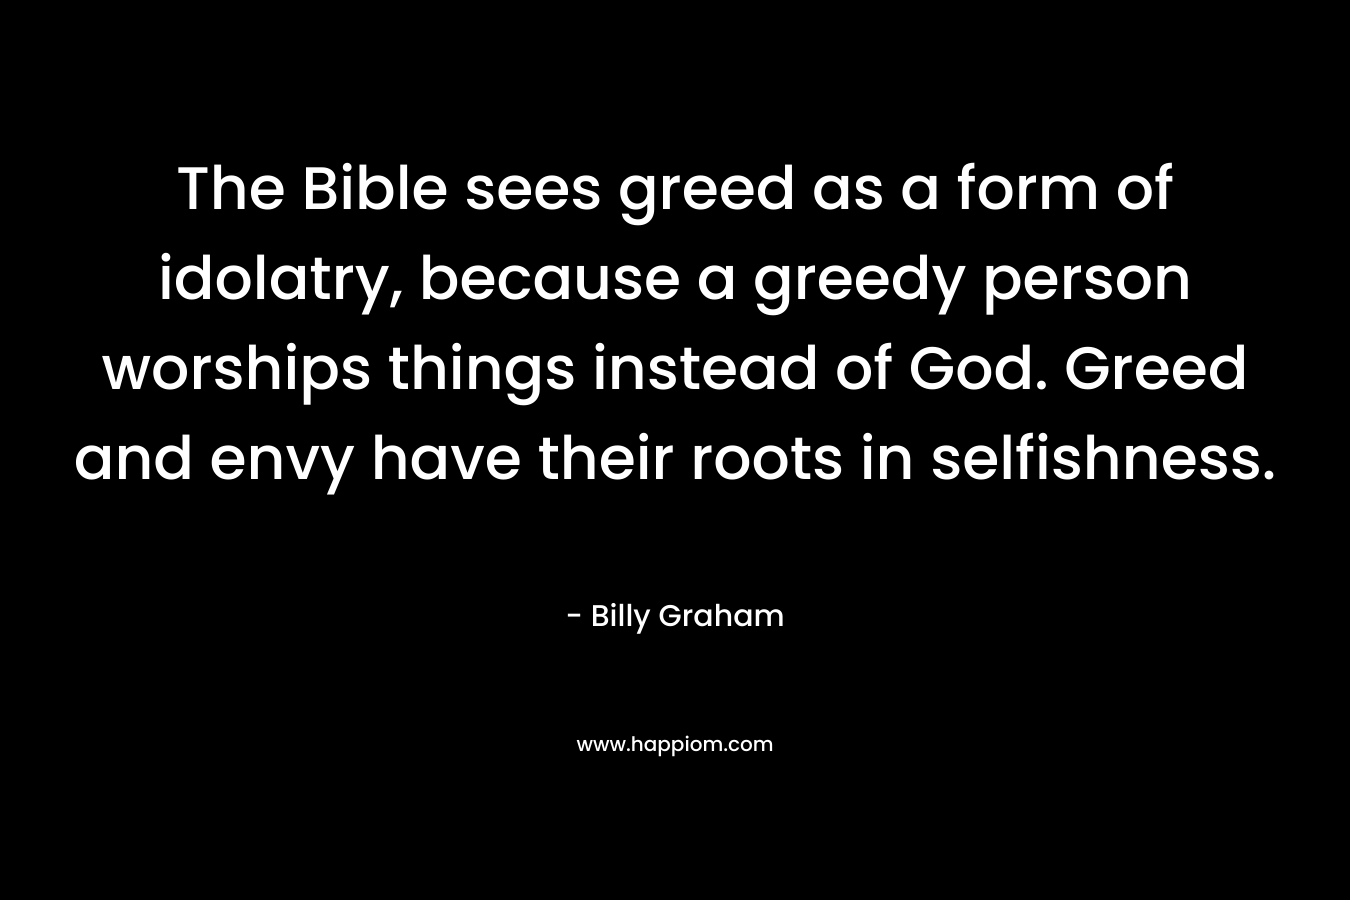 The Bible sees greed as a form of idolatry, because a greedy person worships things instead of God. Greed and envy have their roots in selfishness. – Billy Graham